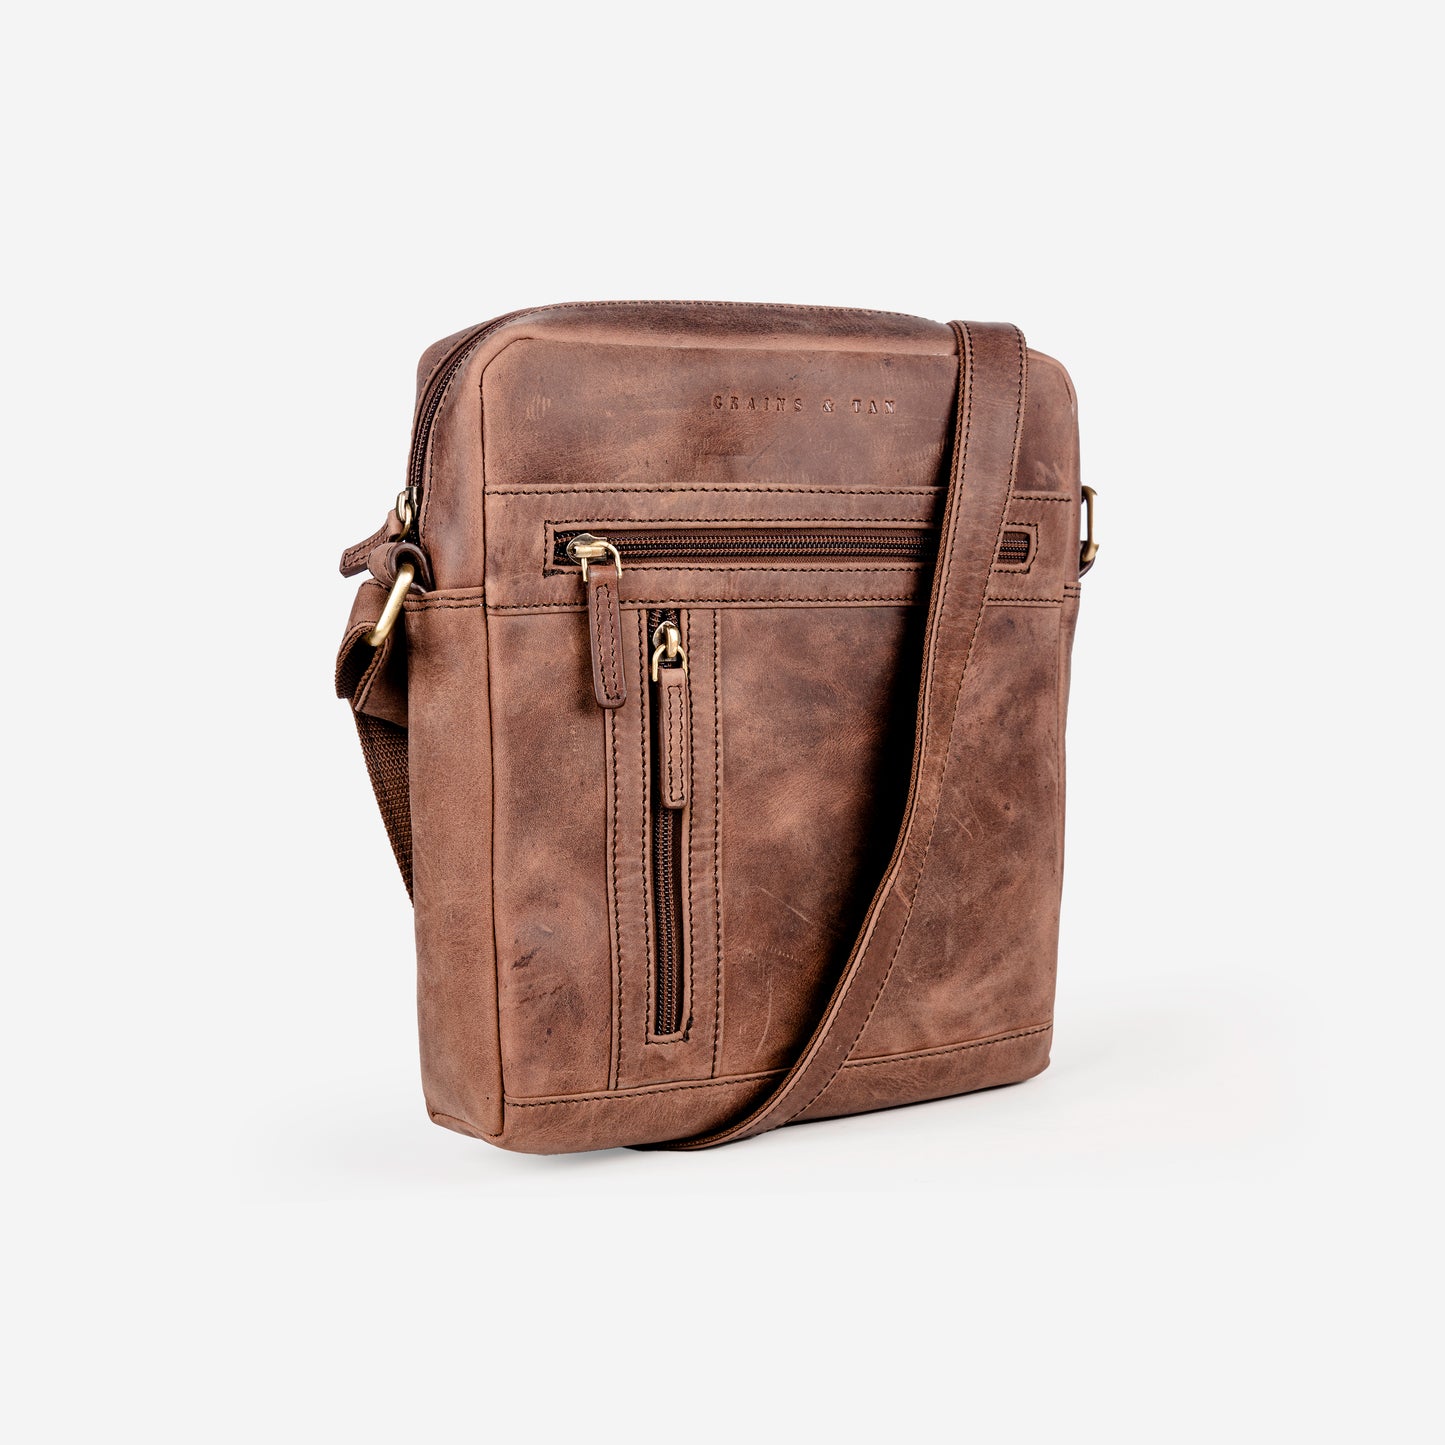 GT-RM3: Medium Leather Crossbody Messenger (RFID Protected) by Grains & Tan